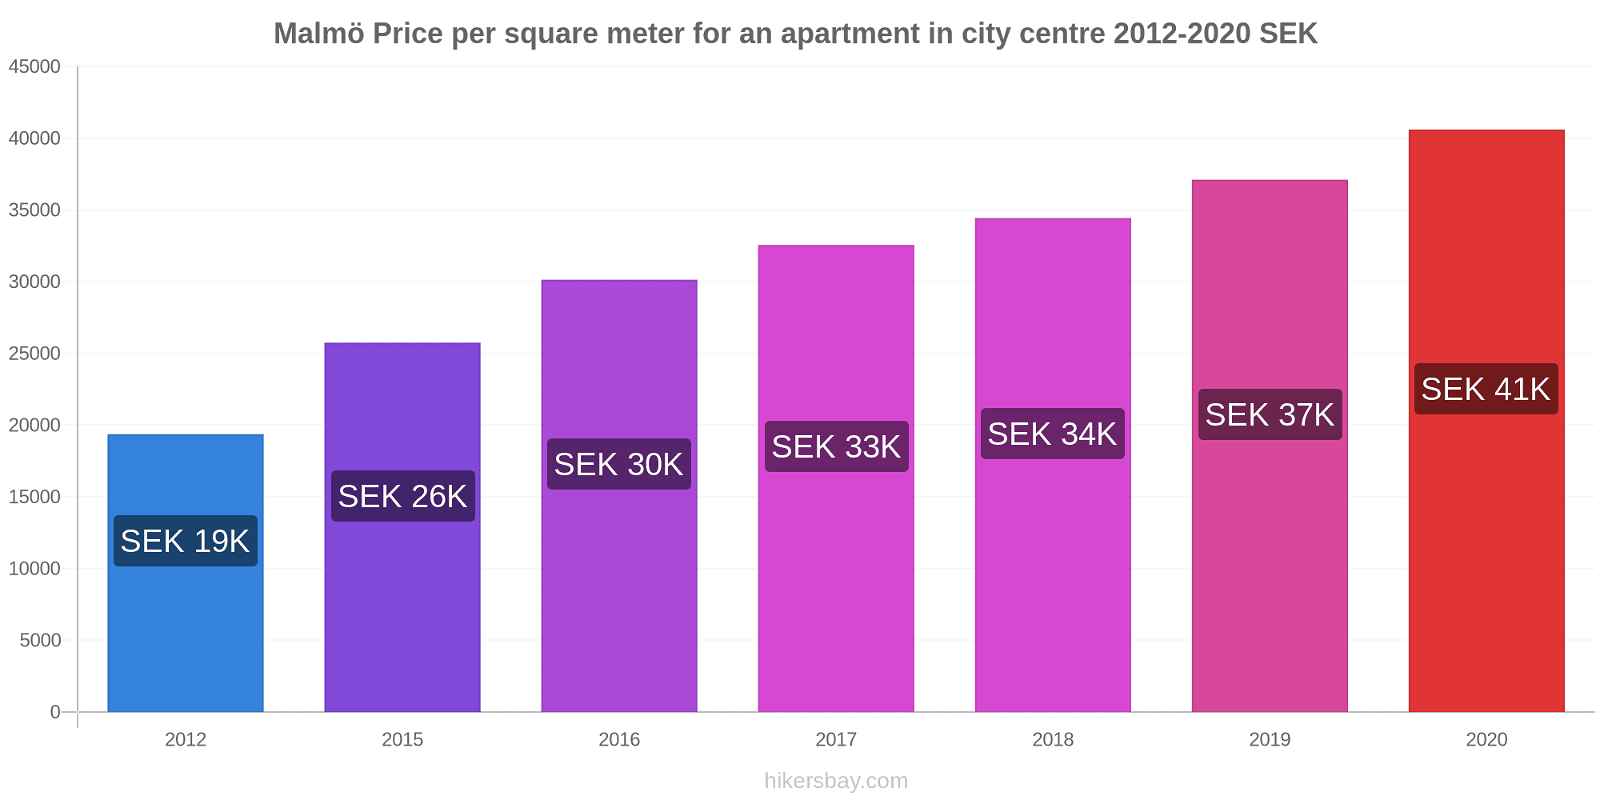 Malmö price changes Price per square meter for an apartment in city centre hikersbay.com